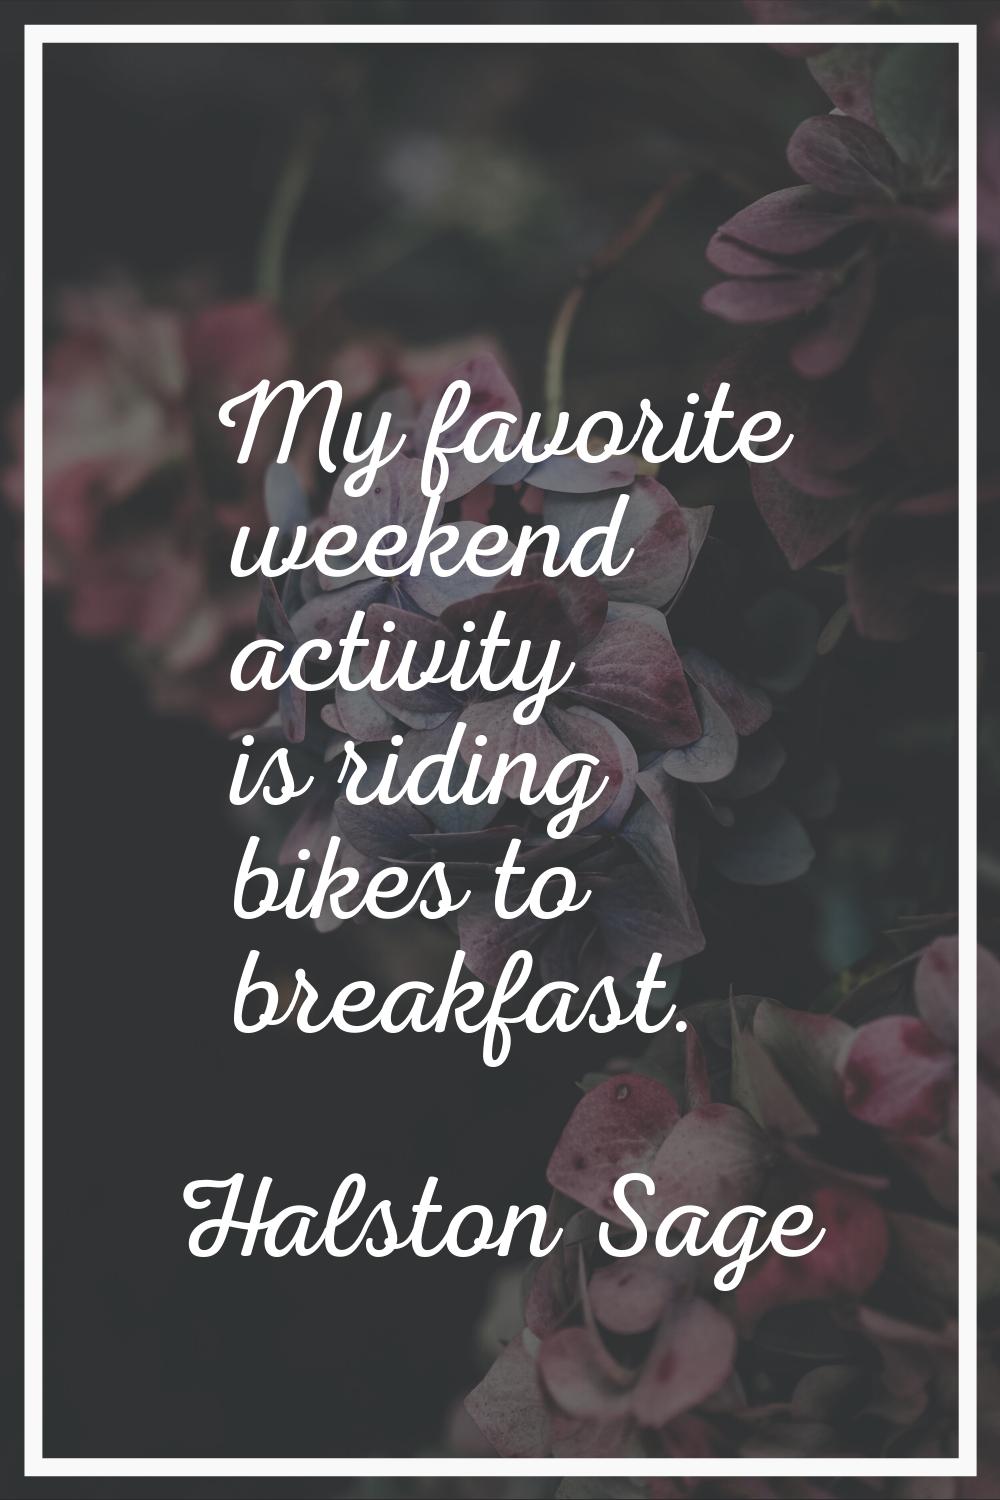 My favorite weekend activity is riding bikes to breakfast.